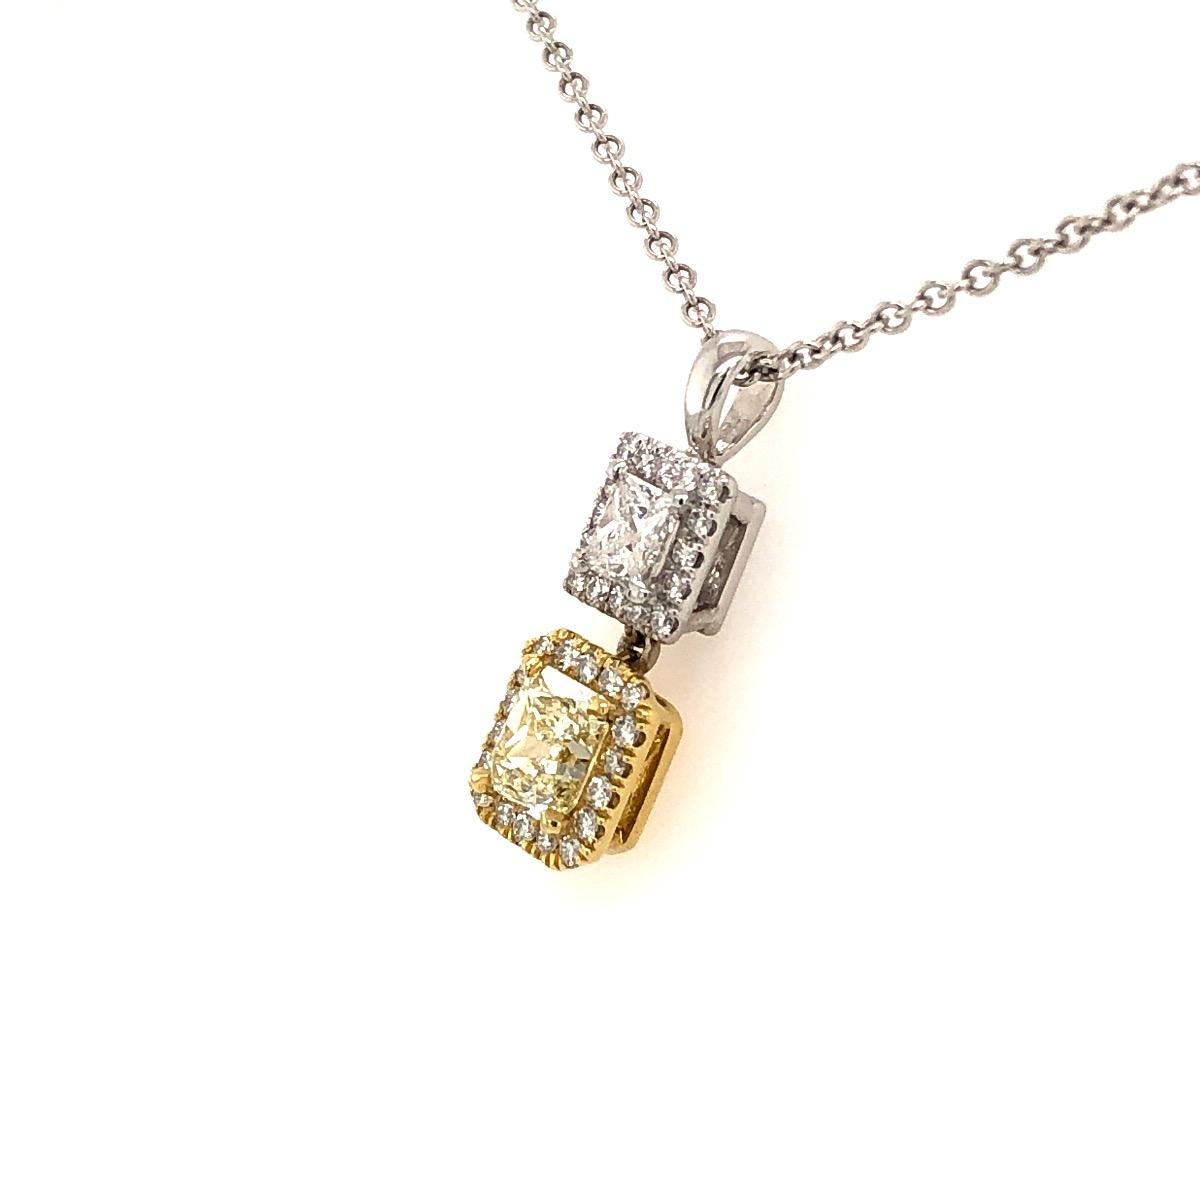 Style:  Fancy yellow and white diamond Pendant 

Metal type: 18kt white and yellow gold + chain

1 1.01ct fancy yellow diamond 

1.38ct white diamond  

Location Of Stone: None 

Has no GIA Certificate. GIA Number:  none